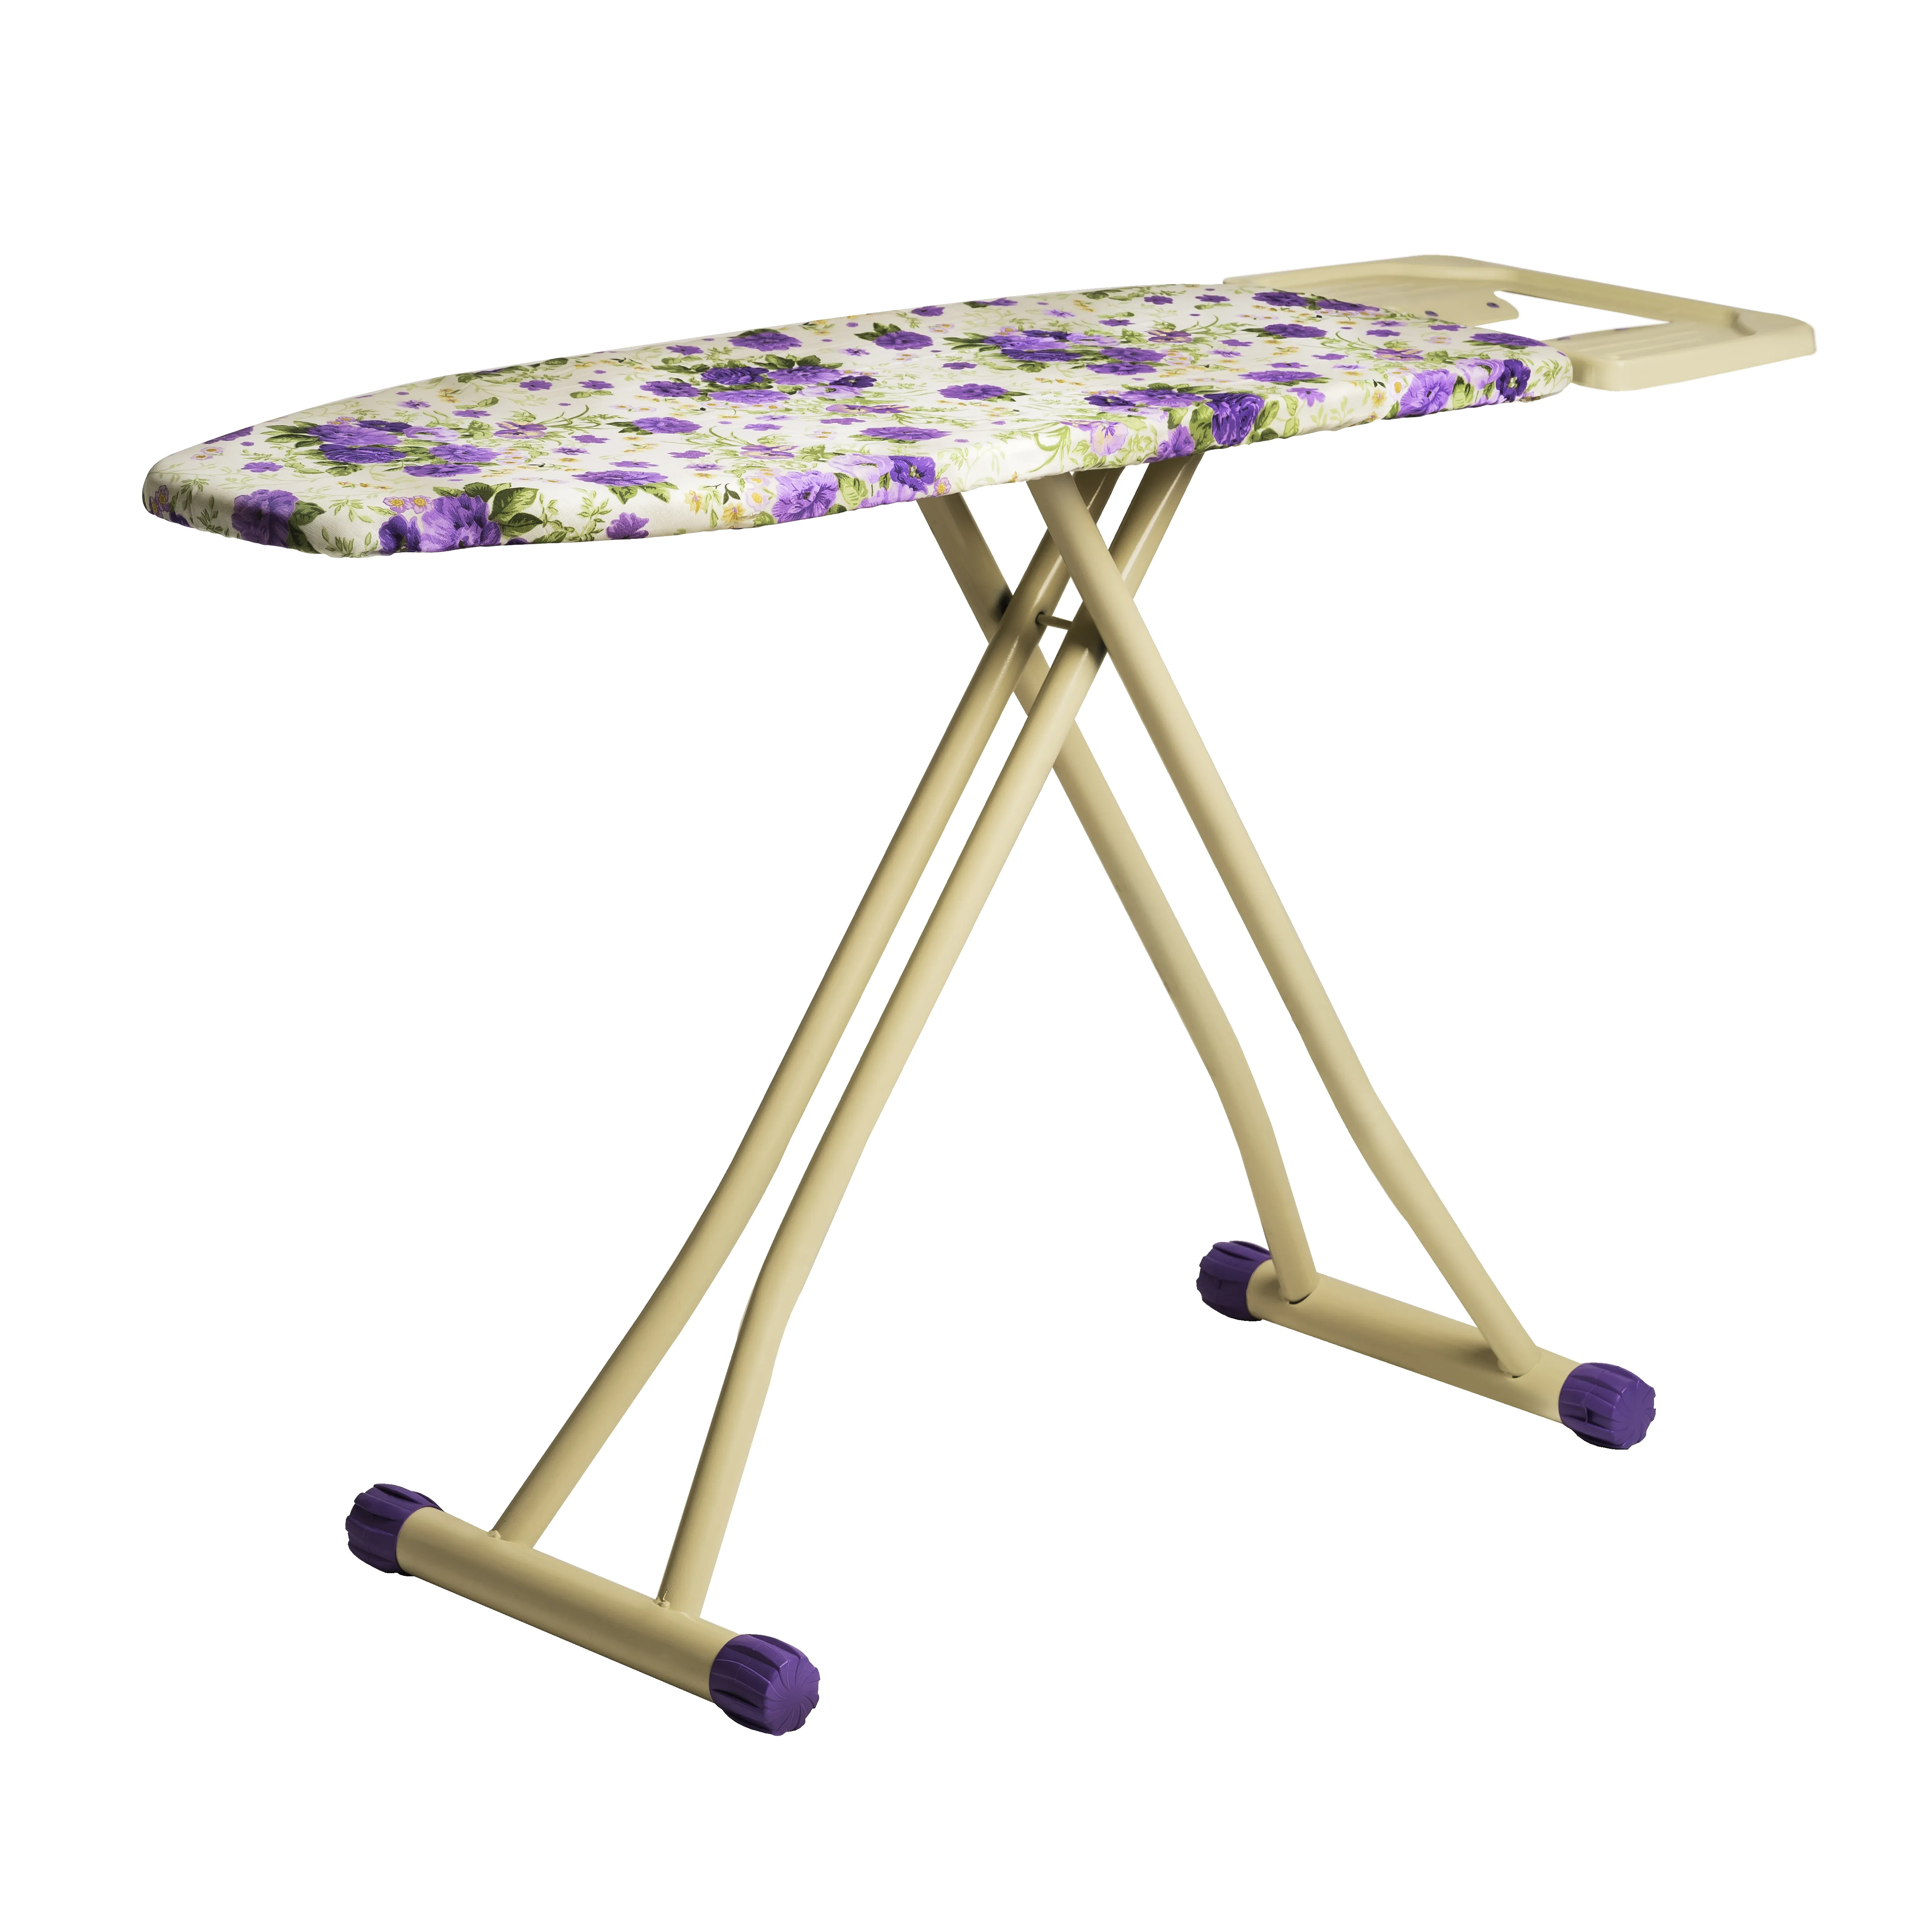 Royalford  RF7138 Mesh Ironing Board 41x116 Cm - Portable, Steam Iron Rest, Heat Resistant Cover | Contemporary Lightweight Board with Adjustable Height & Rubber Feet Cover